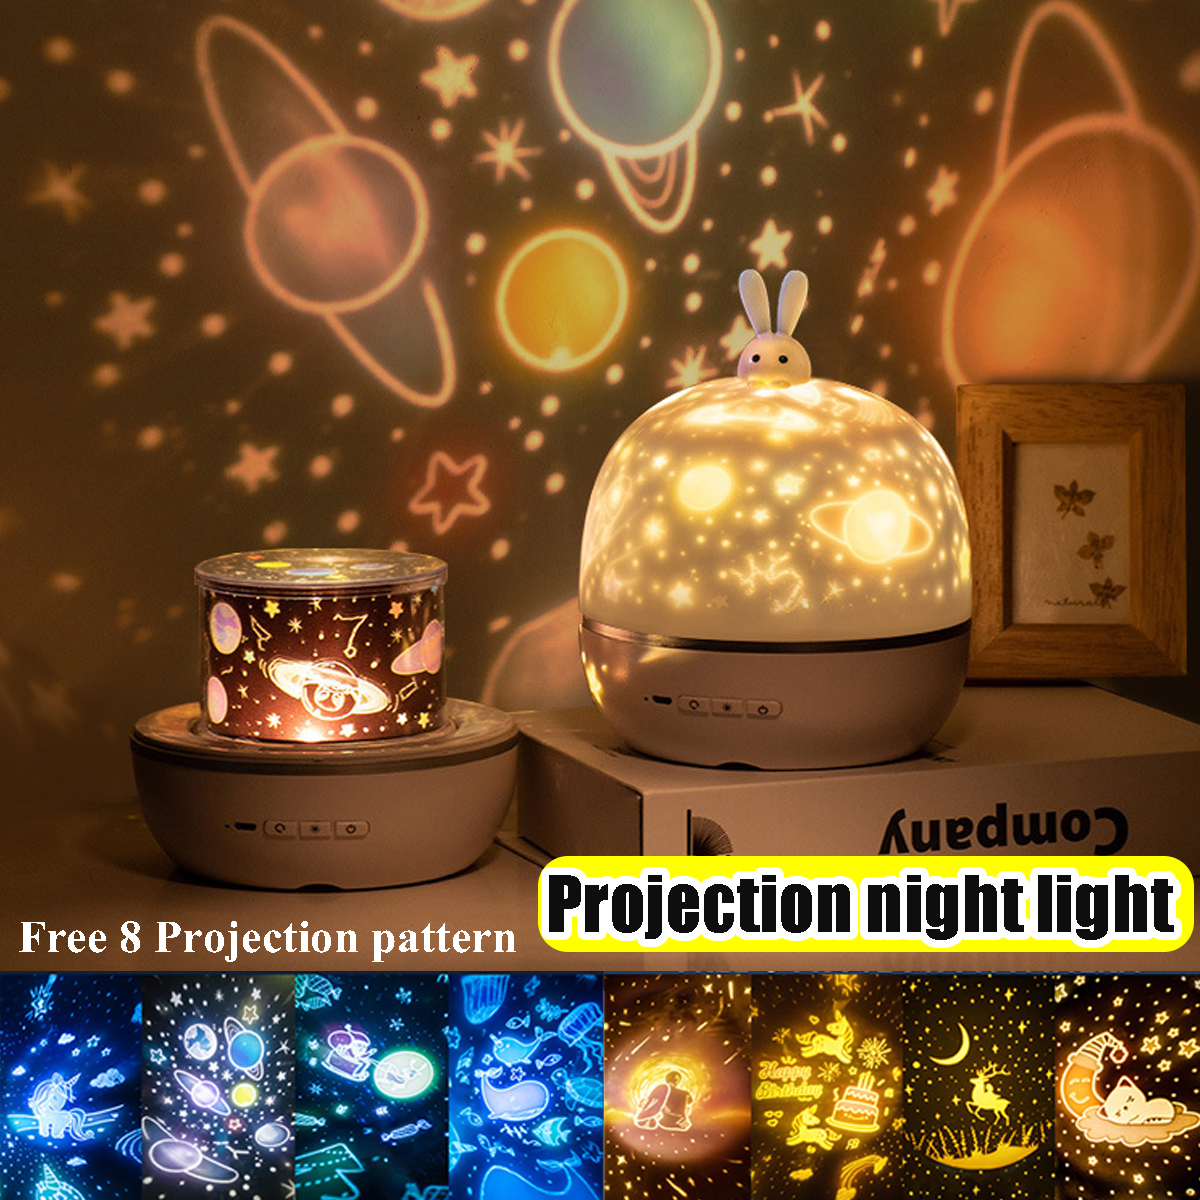 Starry-Sky-Projection-Lamp-3-Color-Ligth-Rotation-Bedroom-Night-Light-Best-Gift-1935373-10